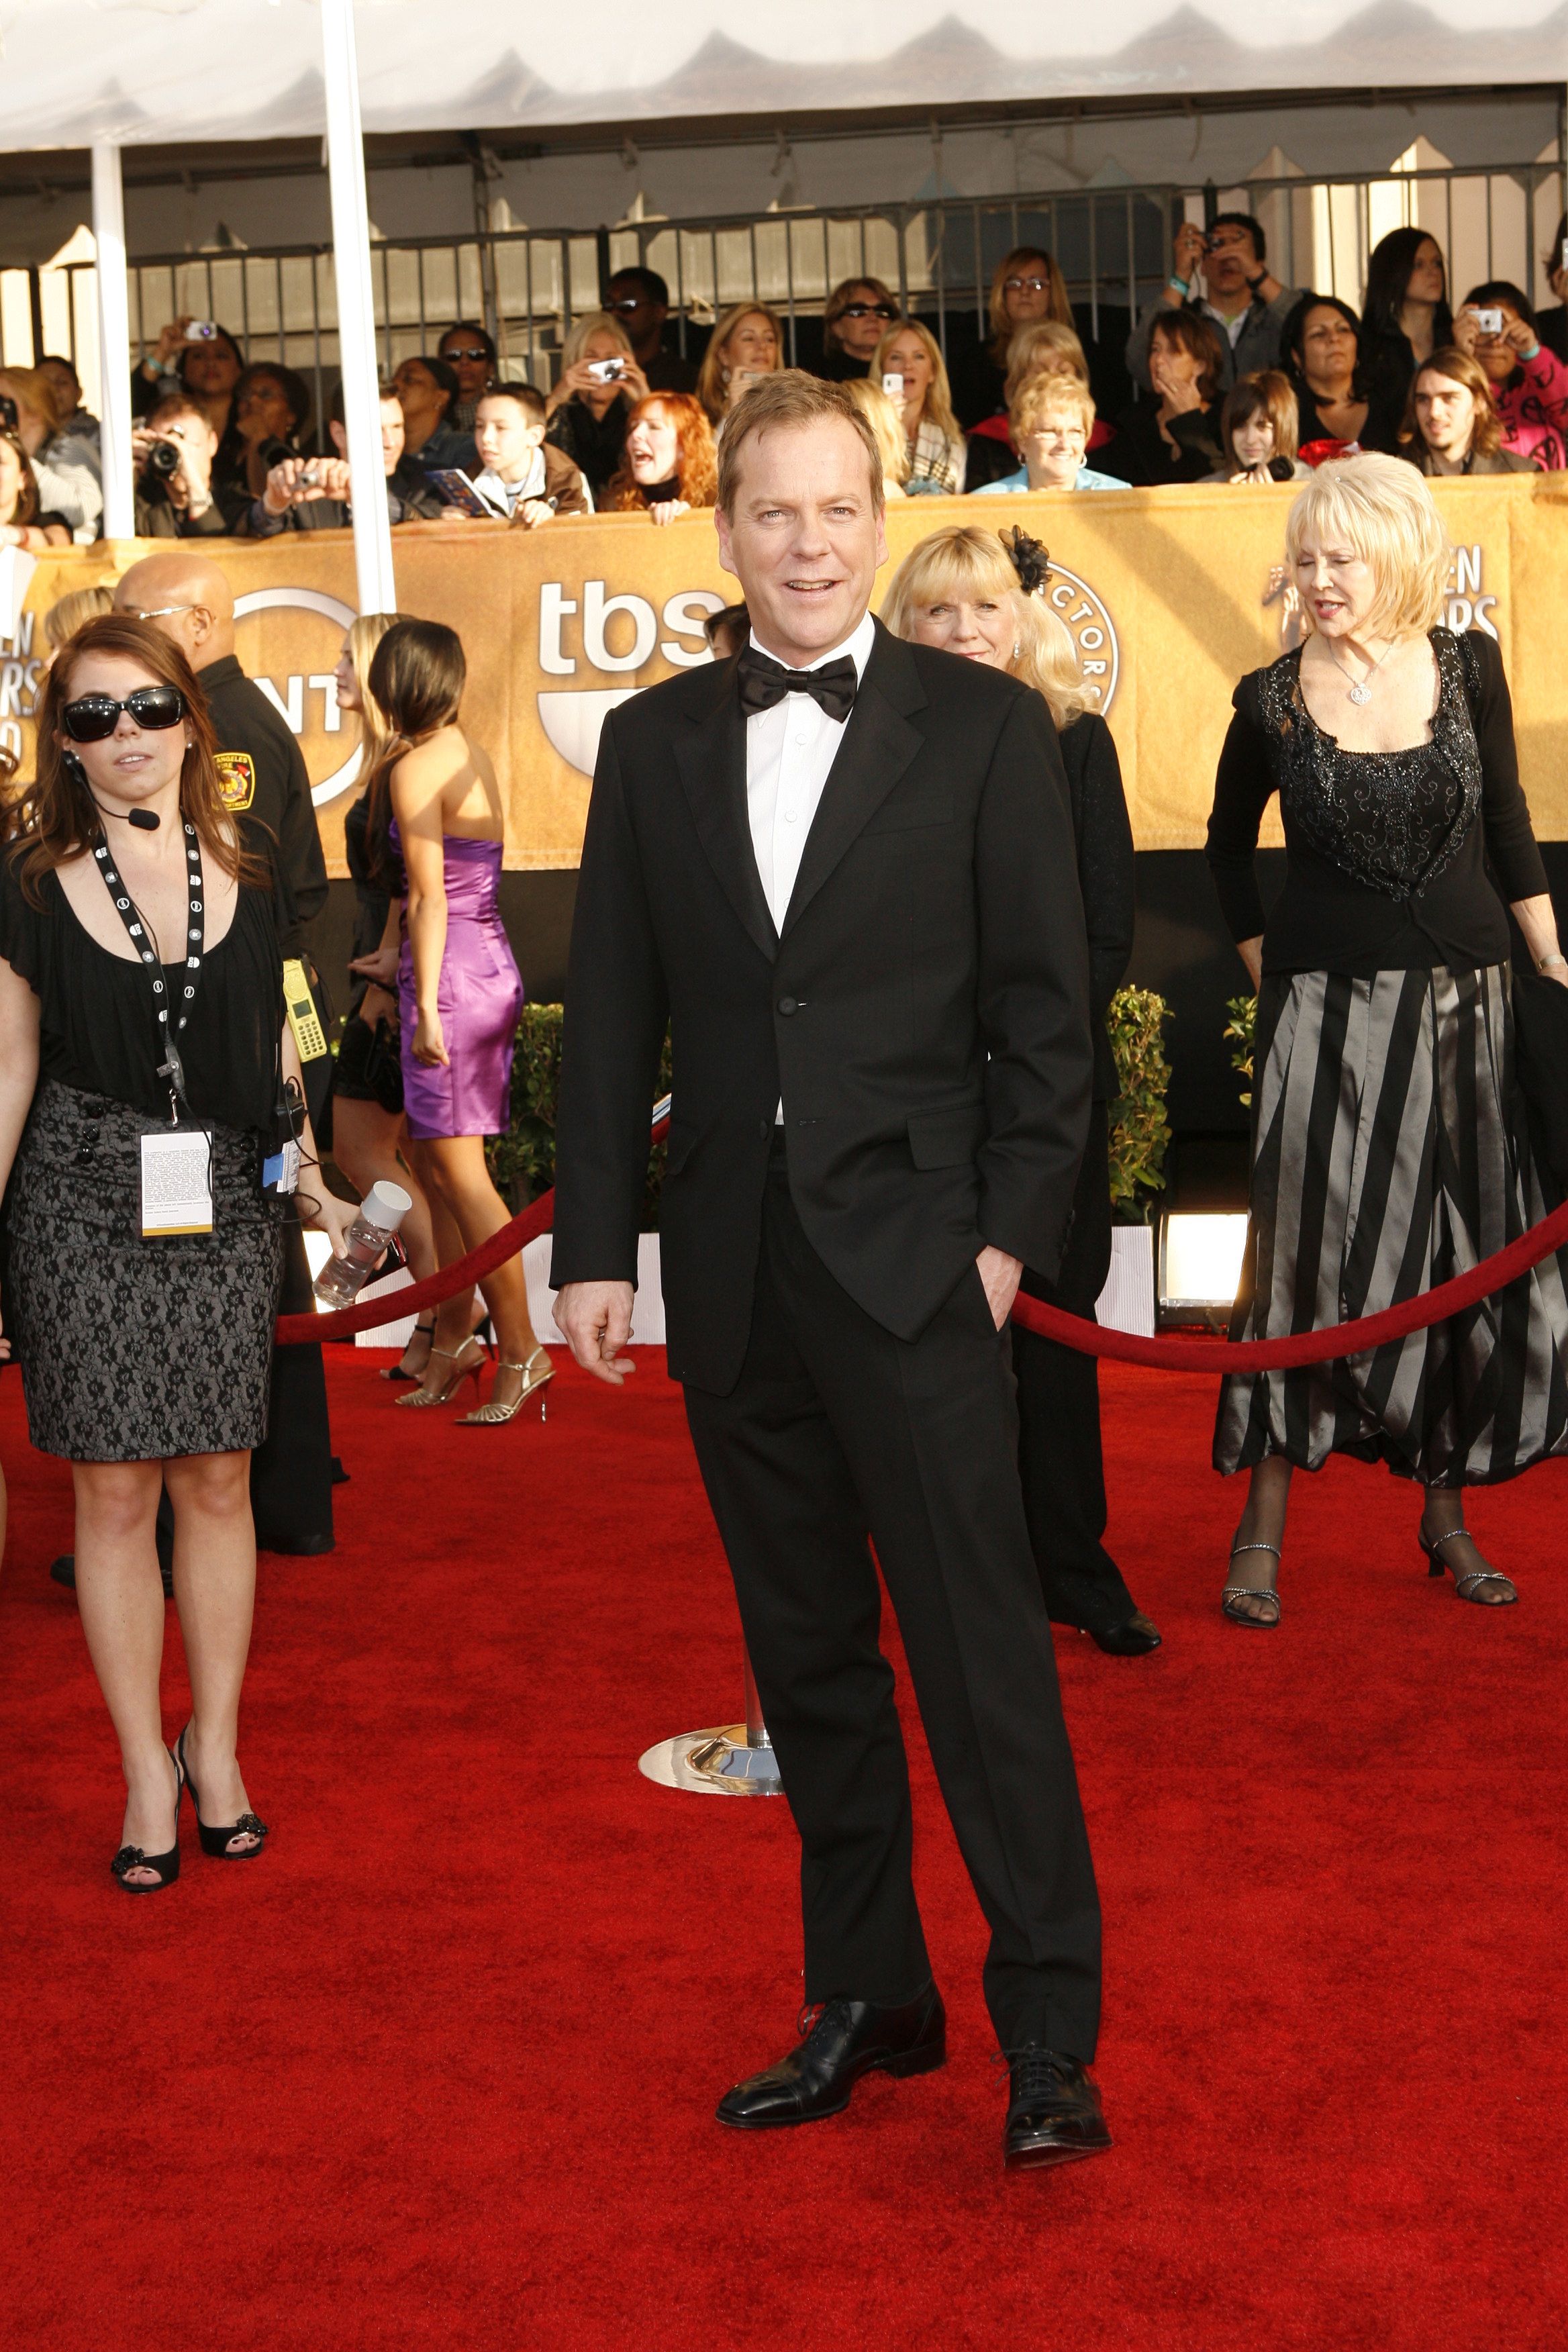 Kiefer Sutherland attends the 15th annual Screen Actors Guild Awards at the Shrine Auditorium.